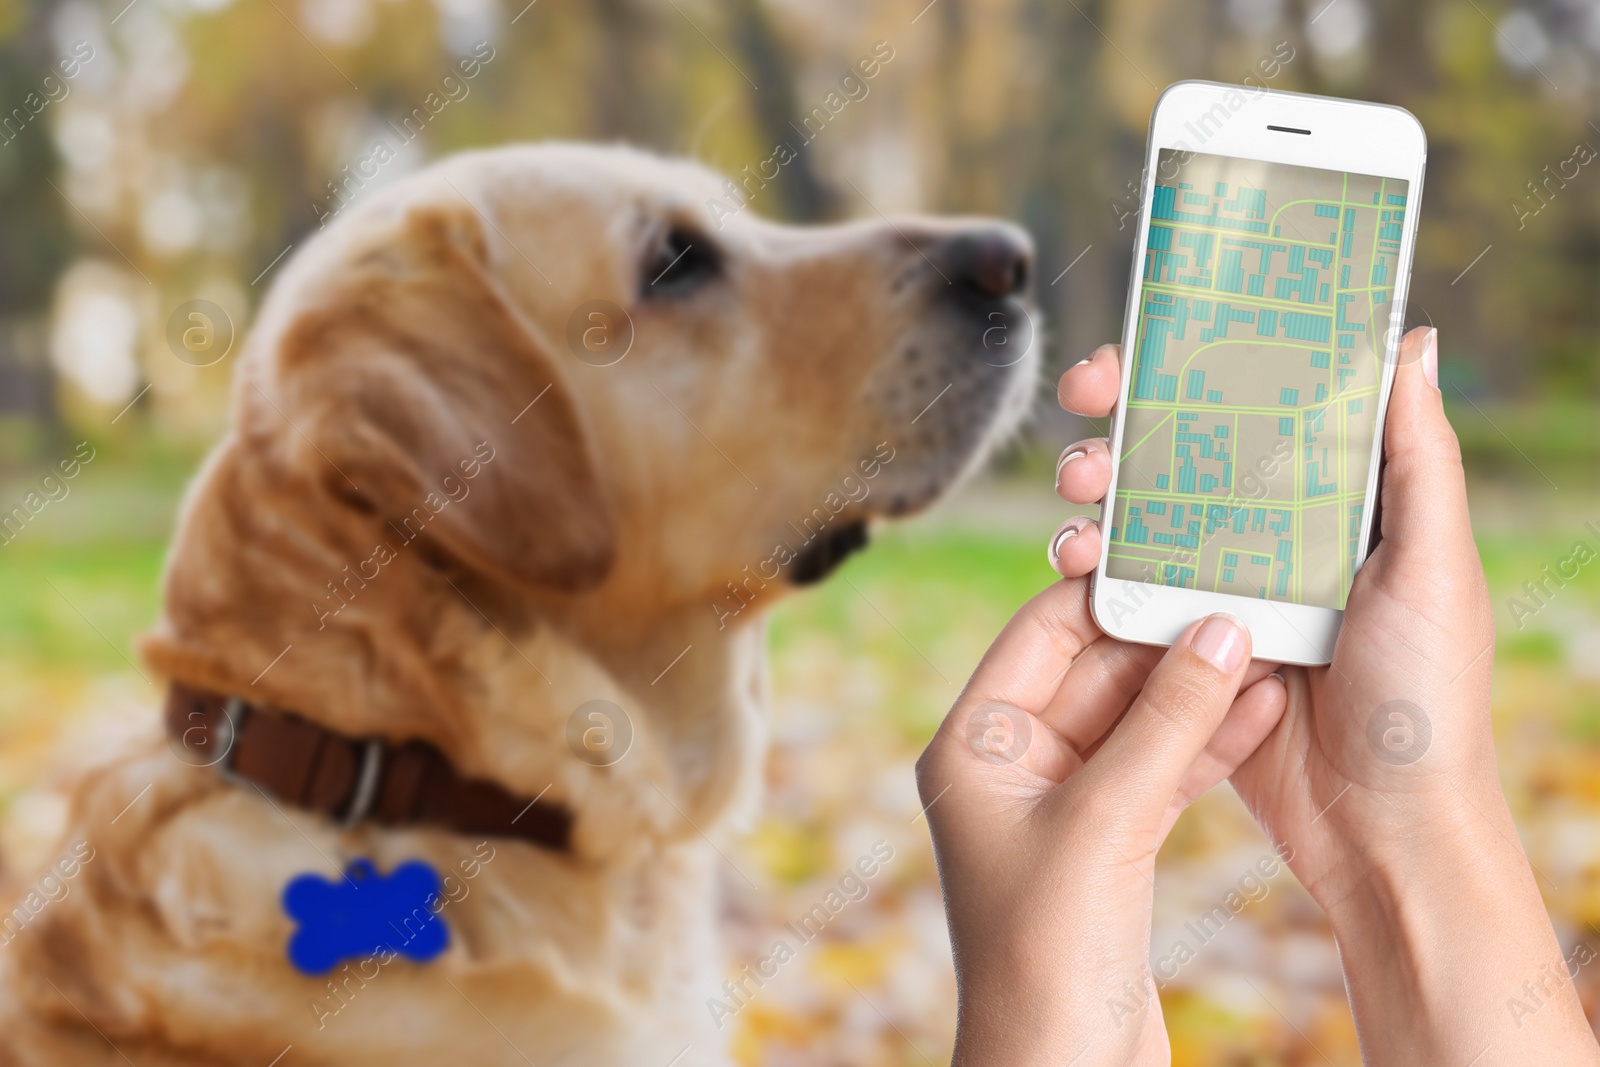 Image of Application to find pet by identification chip. Woman using smartphone near dog with collar outdoors, closeup